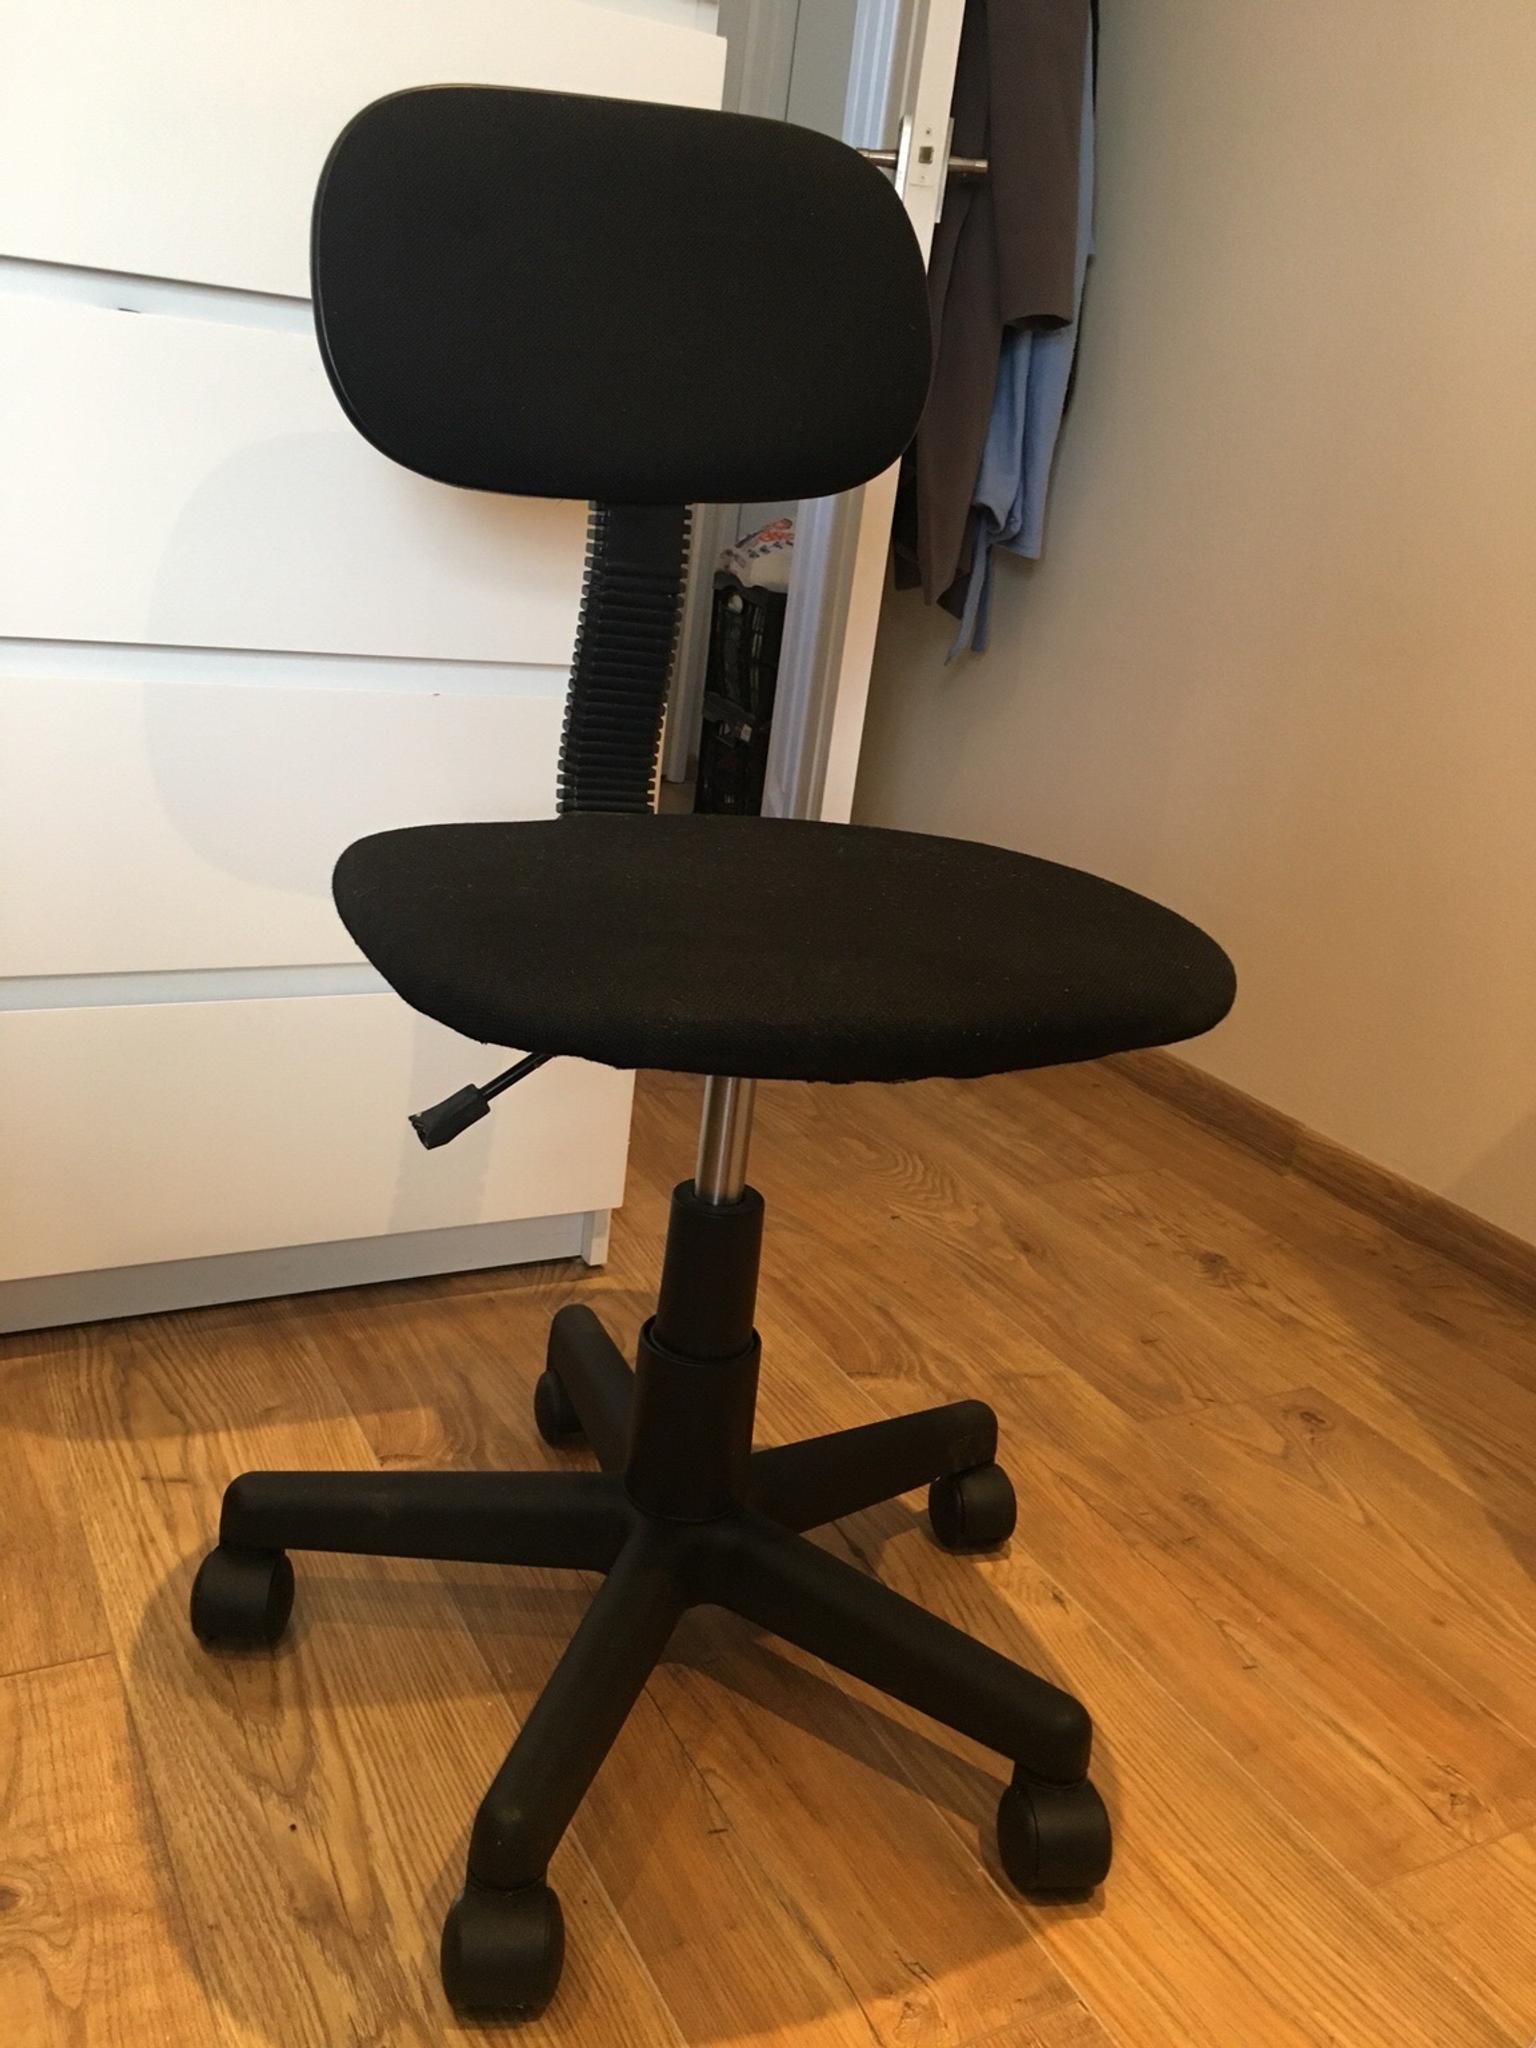 small desk  office chair in lu7 buzzard for £1000 for sale